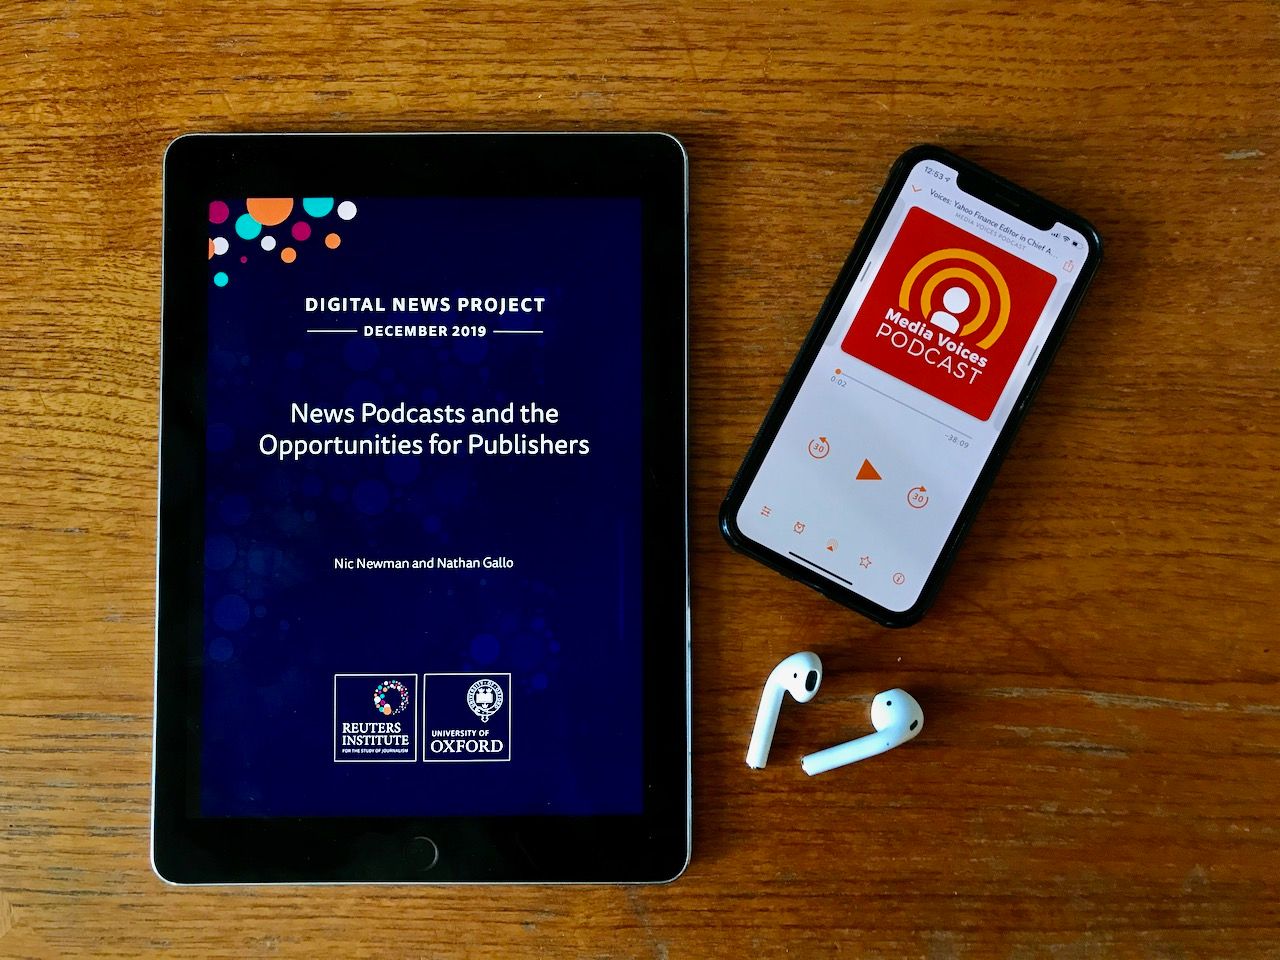 News podcasts: profitable and engaging — but have we got the format right?